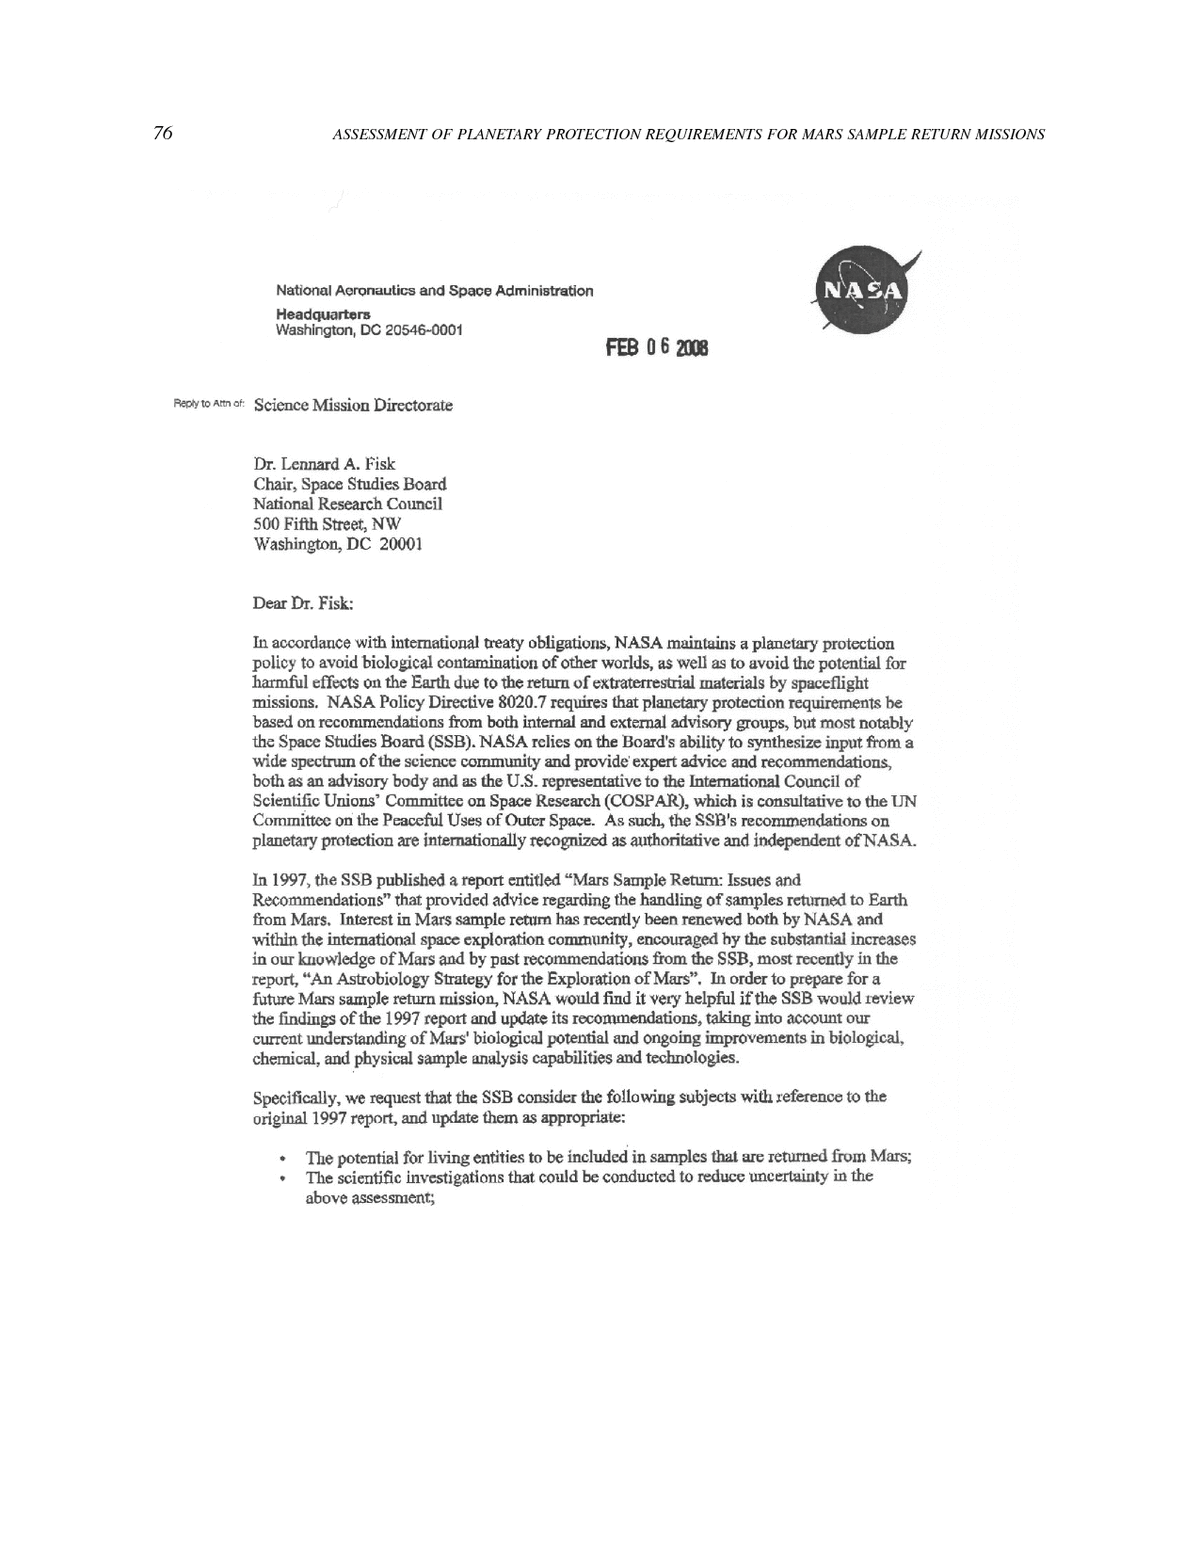 Appendix A Letter Of Request From Nasa Assessment Of Planetary